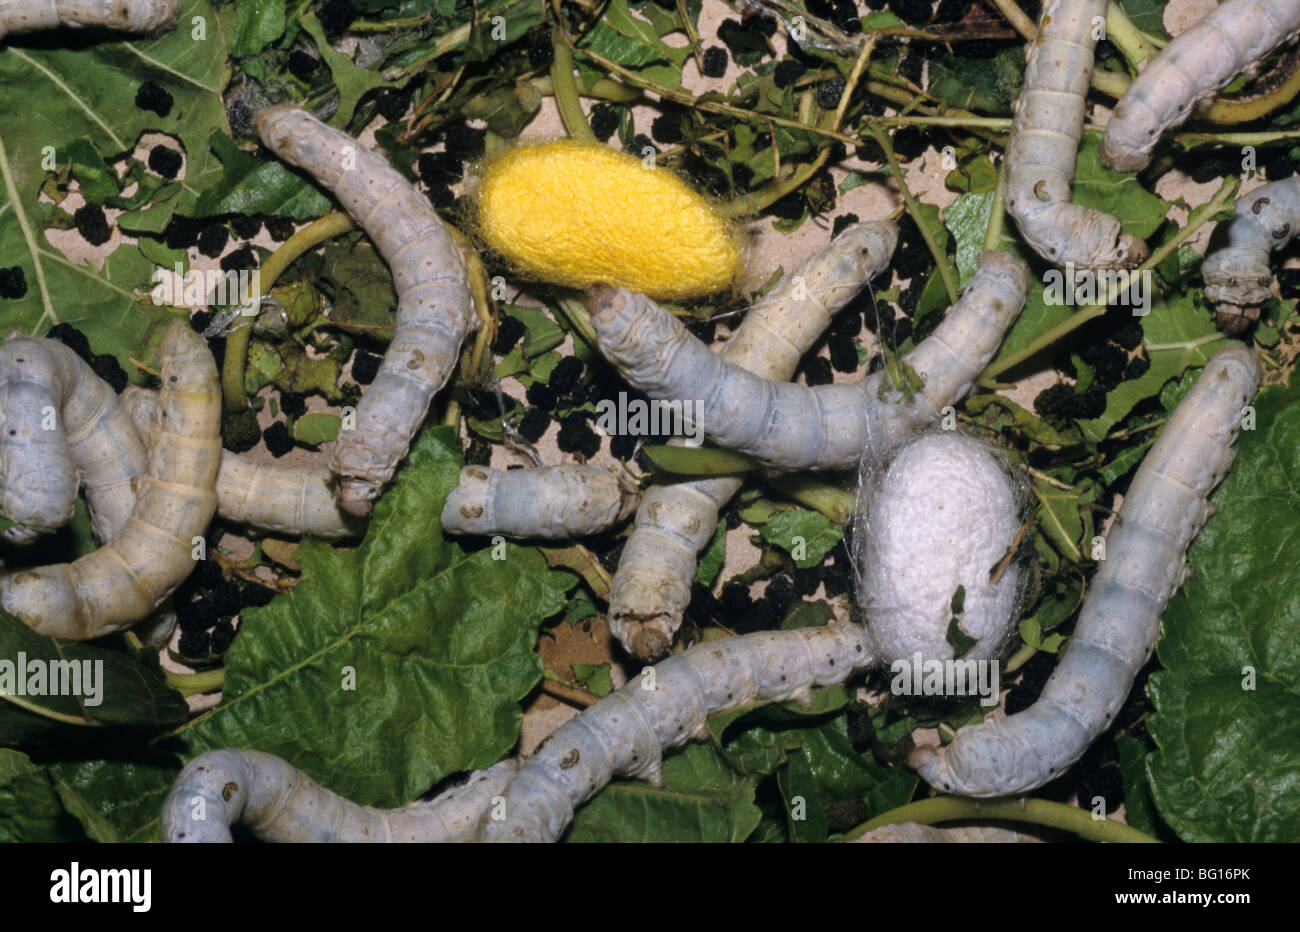 Silk Worms, Caterpillars & Cocoons on Mulberry Leaves, Madagascar Stock Photo